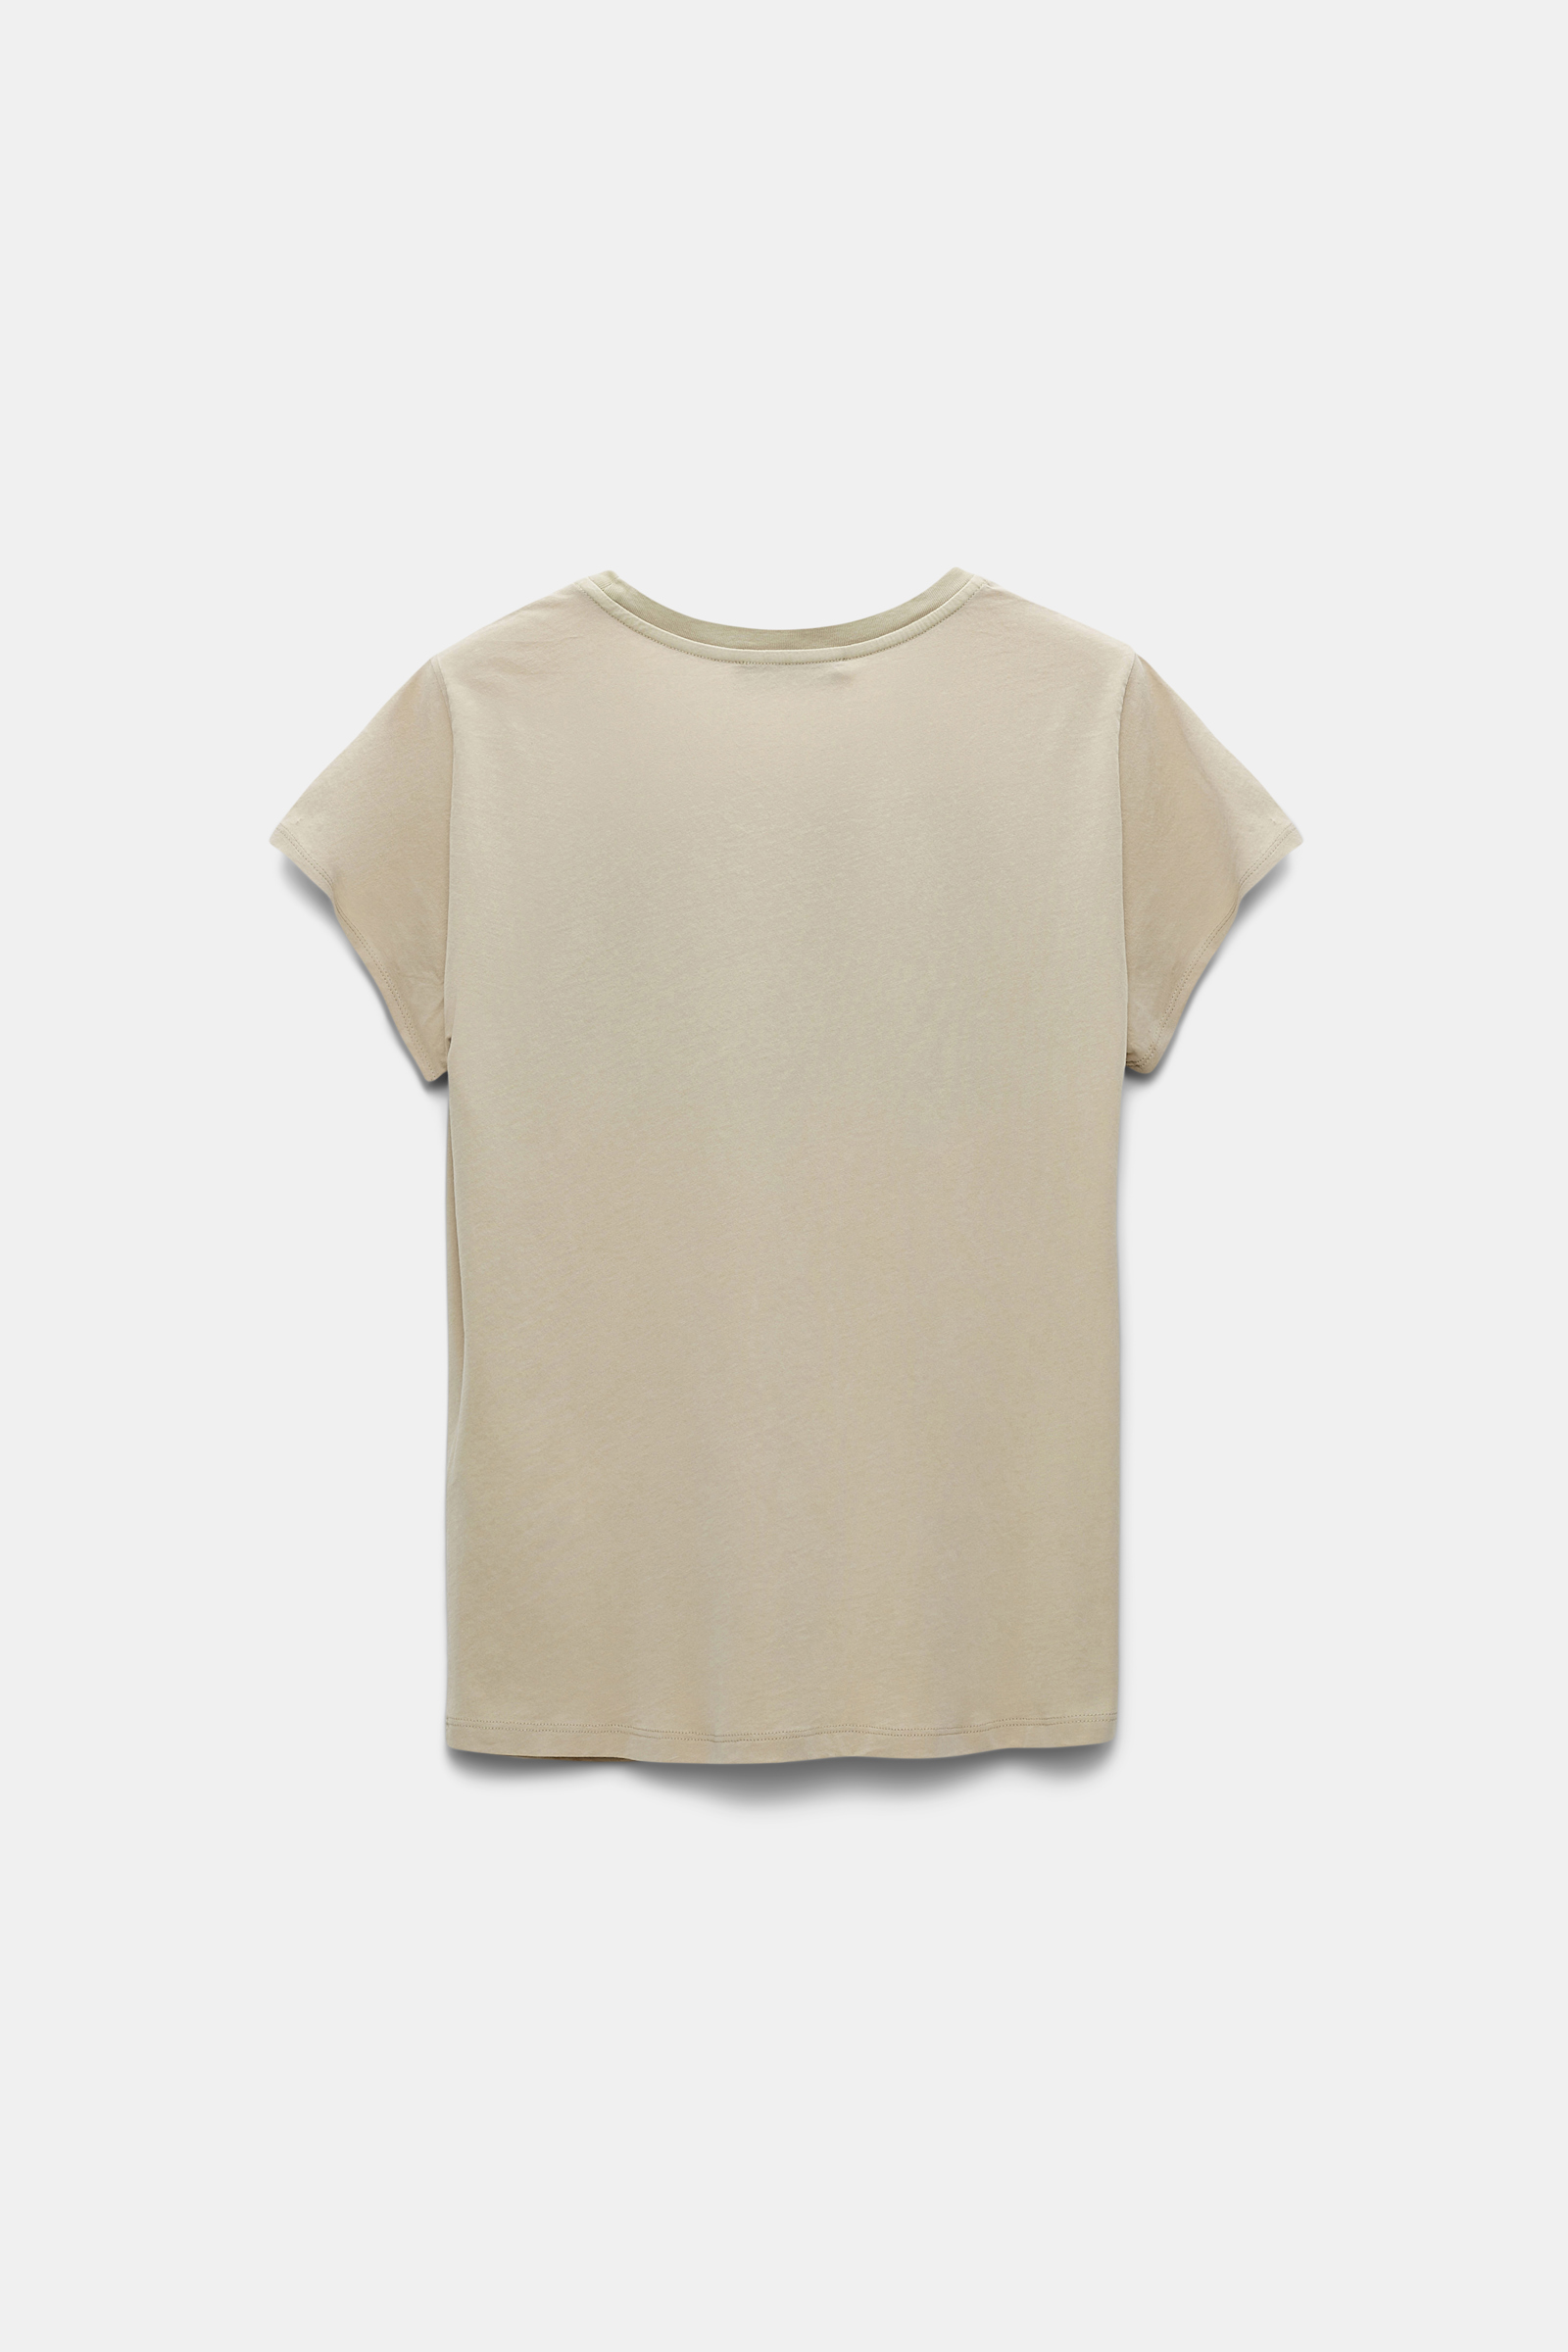 Dorothee Schumacher Cotton T-shirt with lettered SUN print green mix